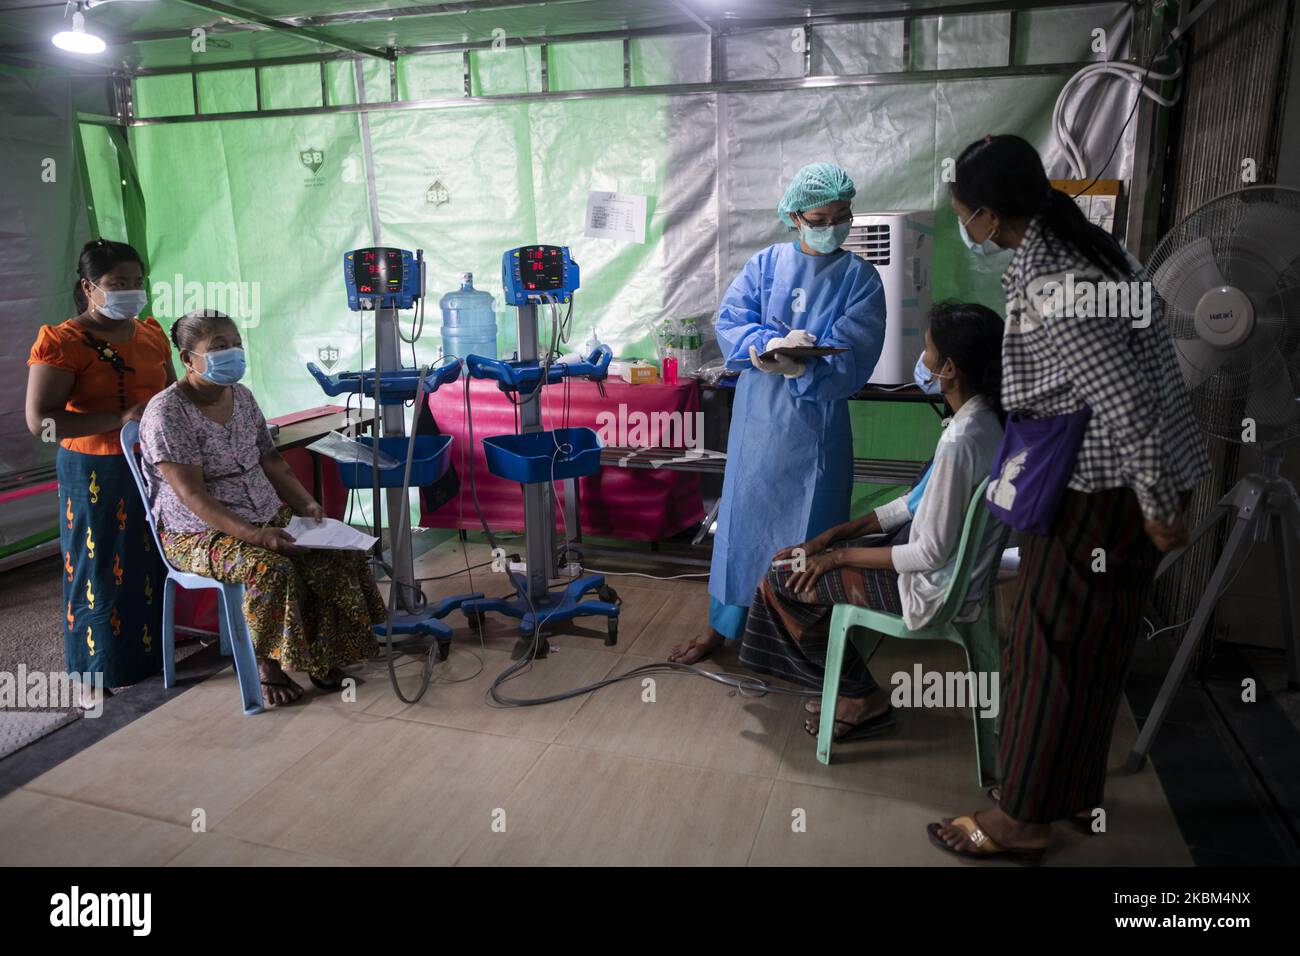 A medical worker checks a patient at the entrance of Yangon General Hospital in Myanmar, April 7, 2020. (Photo by Shwe Paw Mya Tin/NurPhoto) Stock Photo